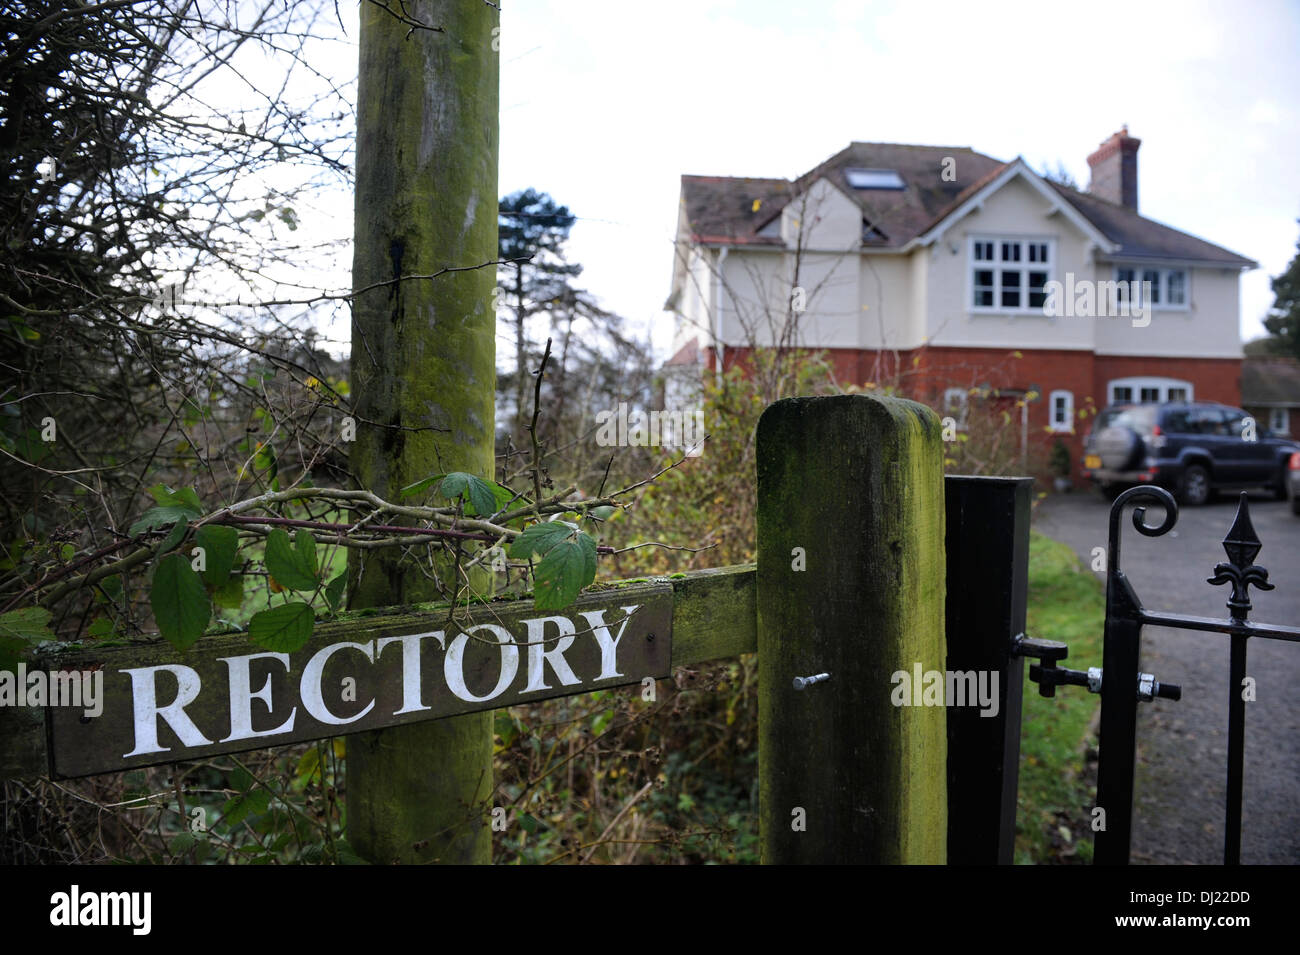 An unkempt sign to a modern Rectory UK Stock Photo